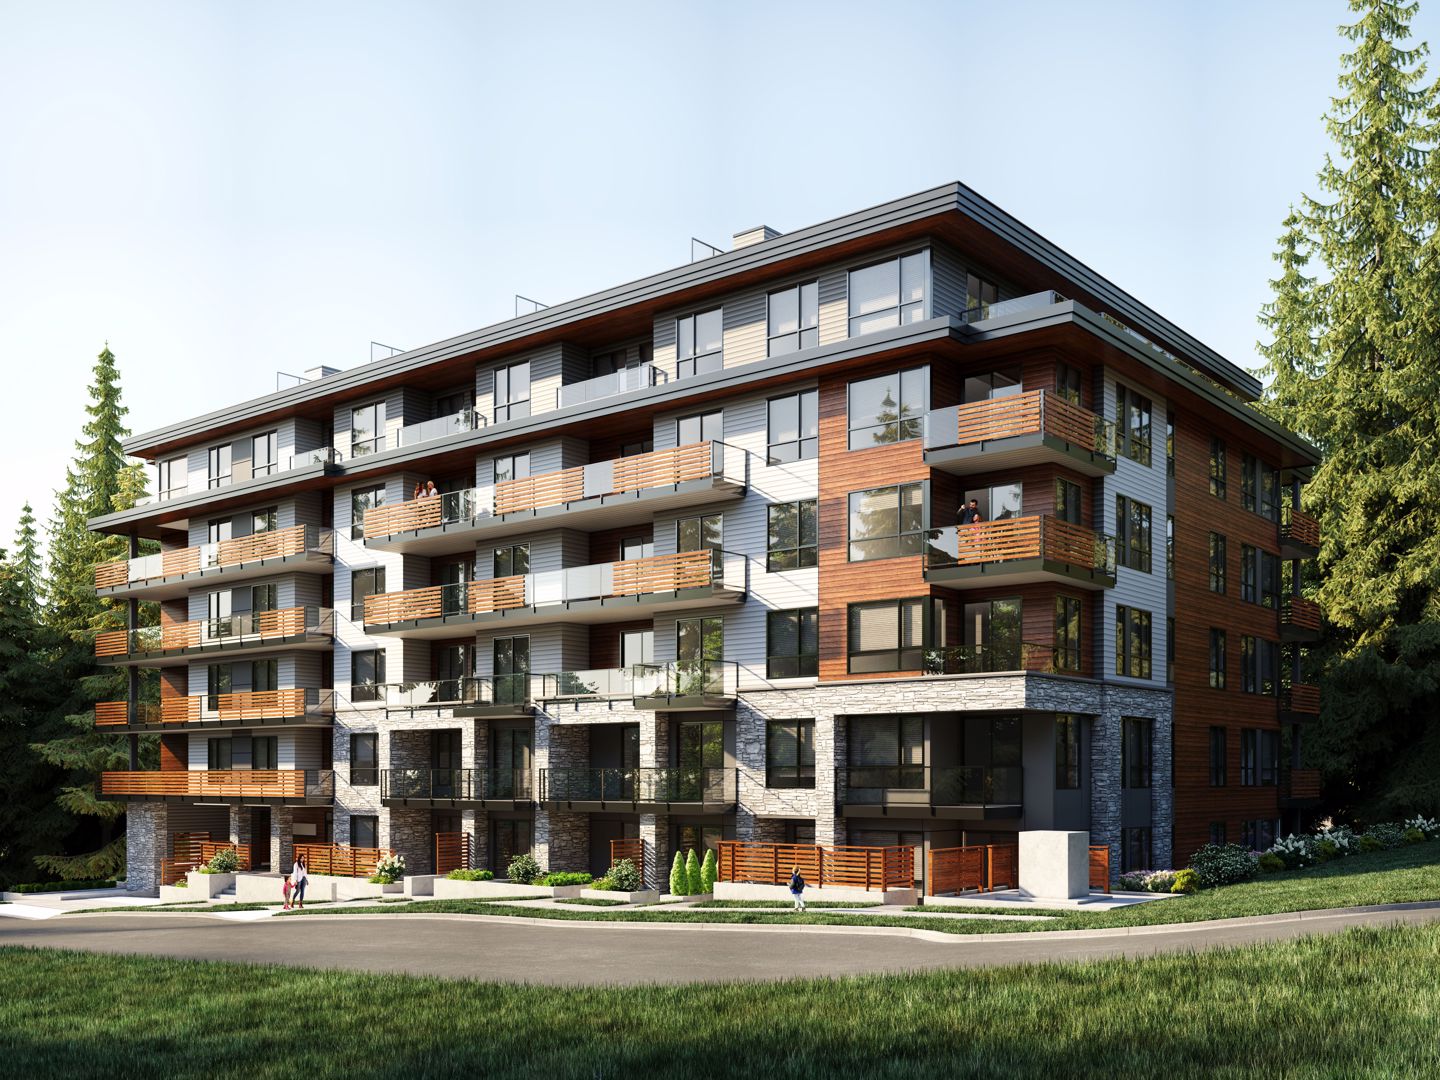 A 6-storey Moody Centre residential building with 88 condos and affordable rental apartments.